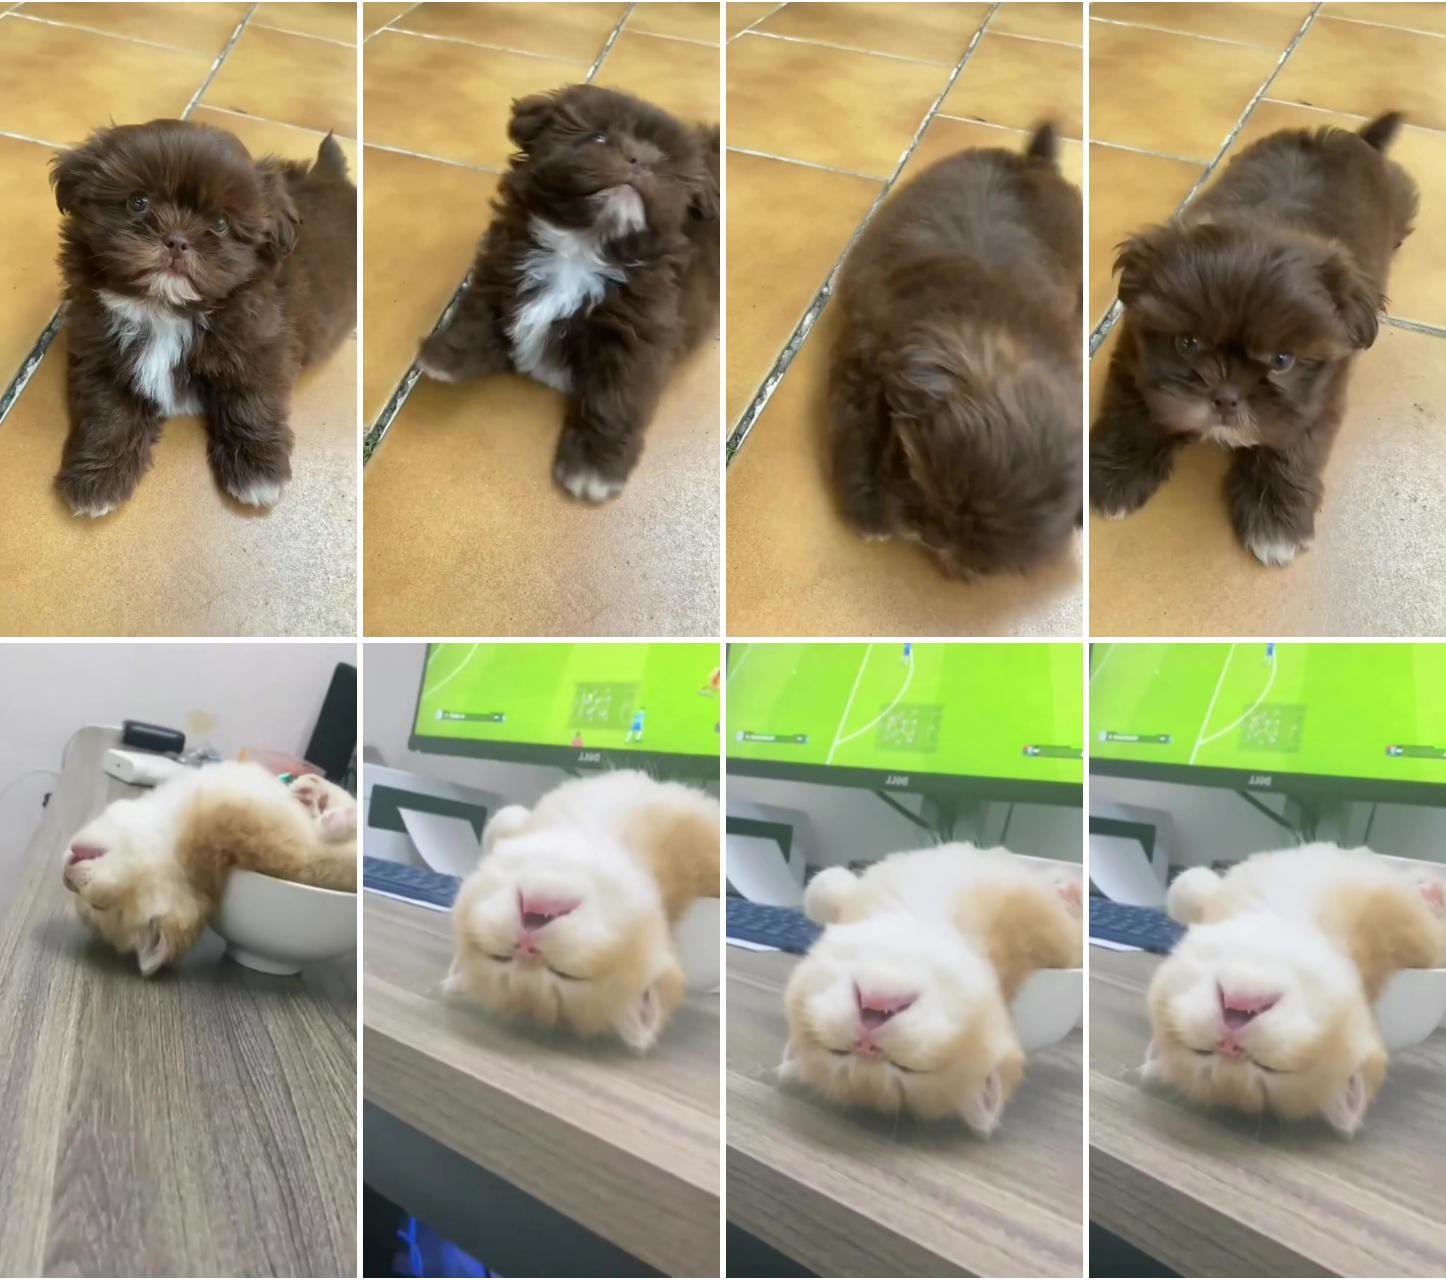 Its nap time ; cute fluffy dogs